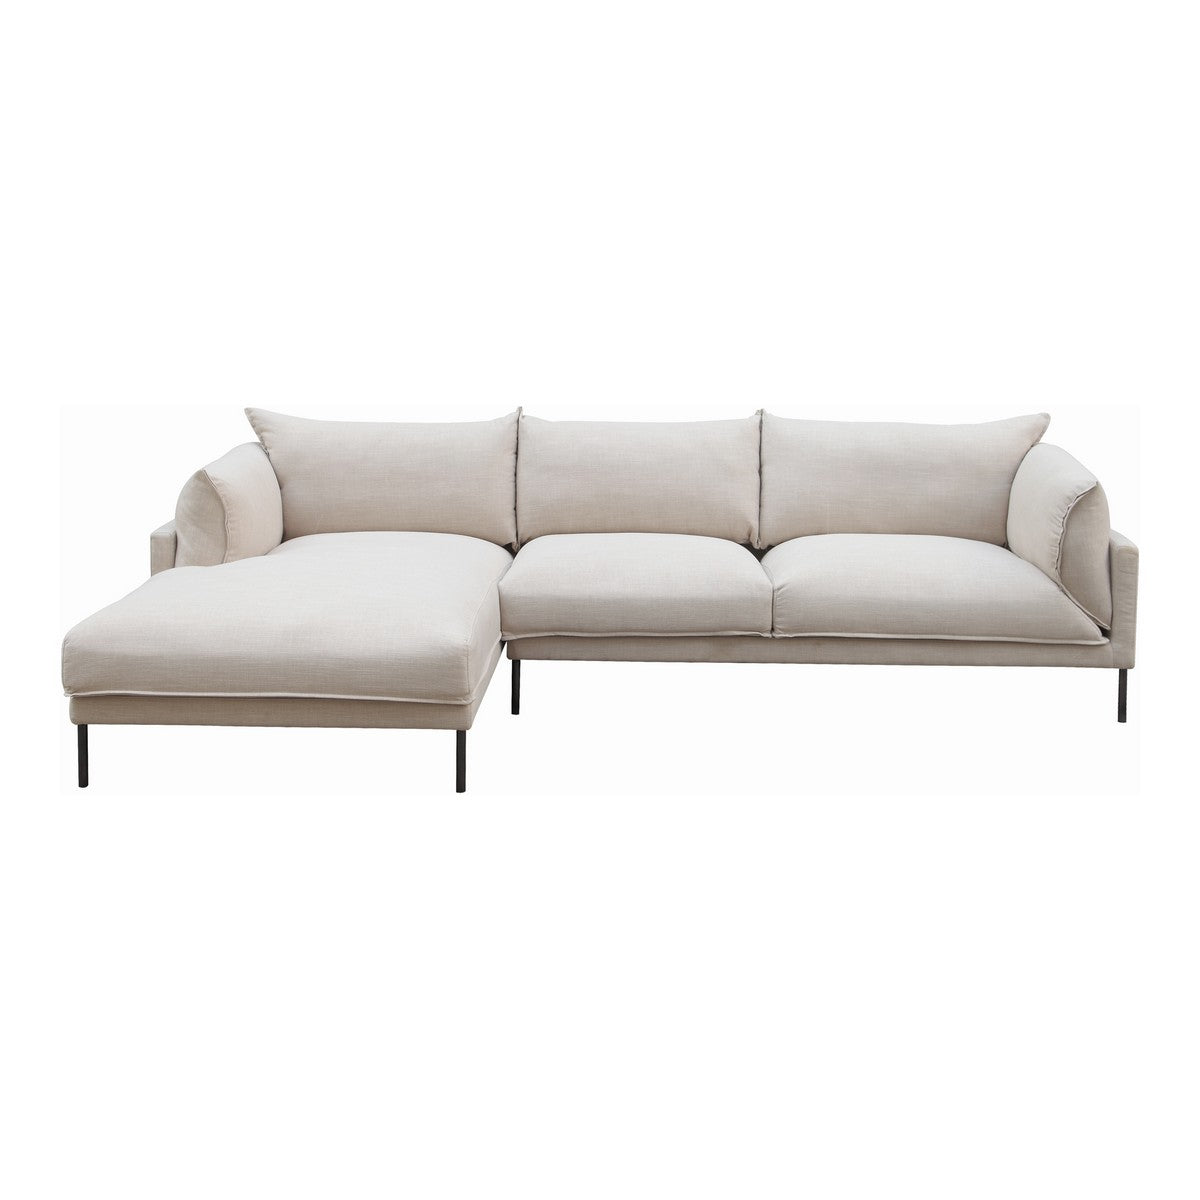 Moe's Home Collection Jamara Sectional Left Sandy Beige - UB-1016-29-L - Moe's Home Collection - sofa sectionals - Minimal And Modern - 1